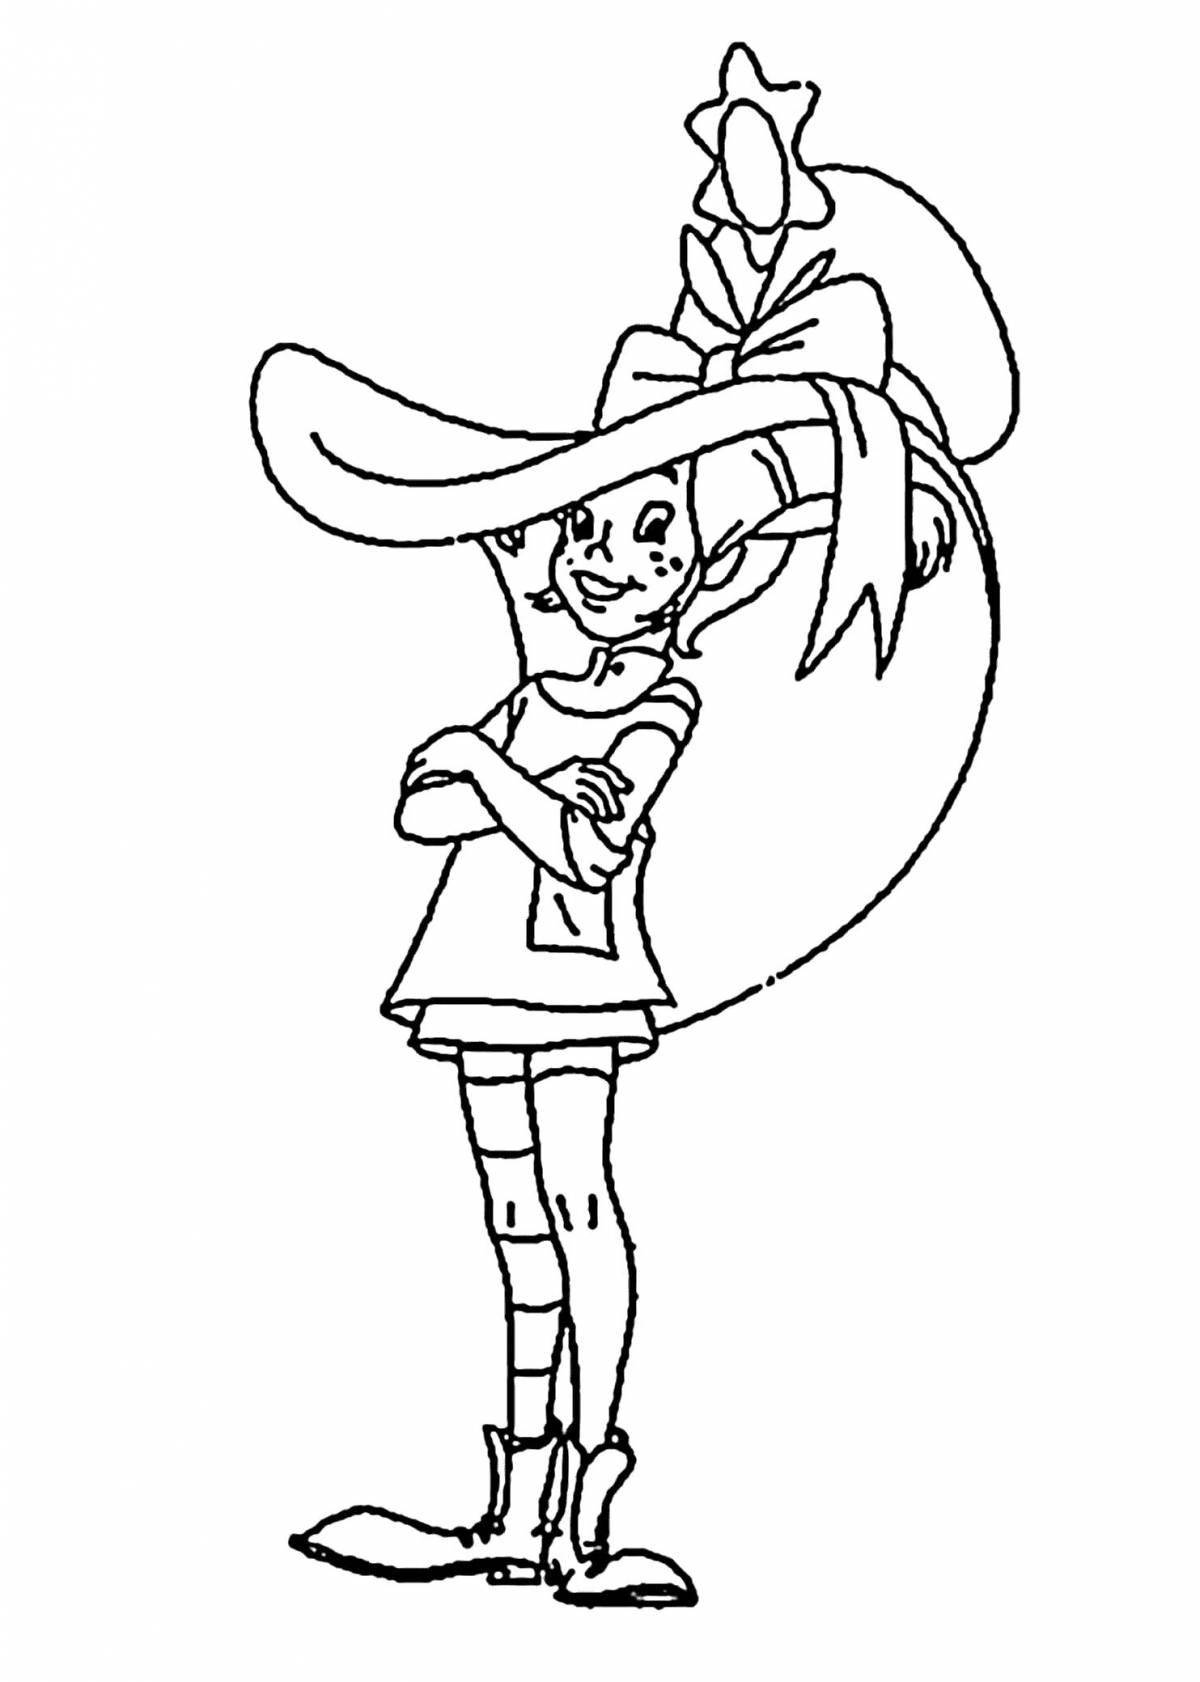 Colorful pippi longstocking coloring page